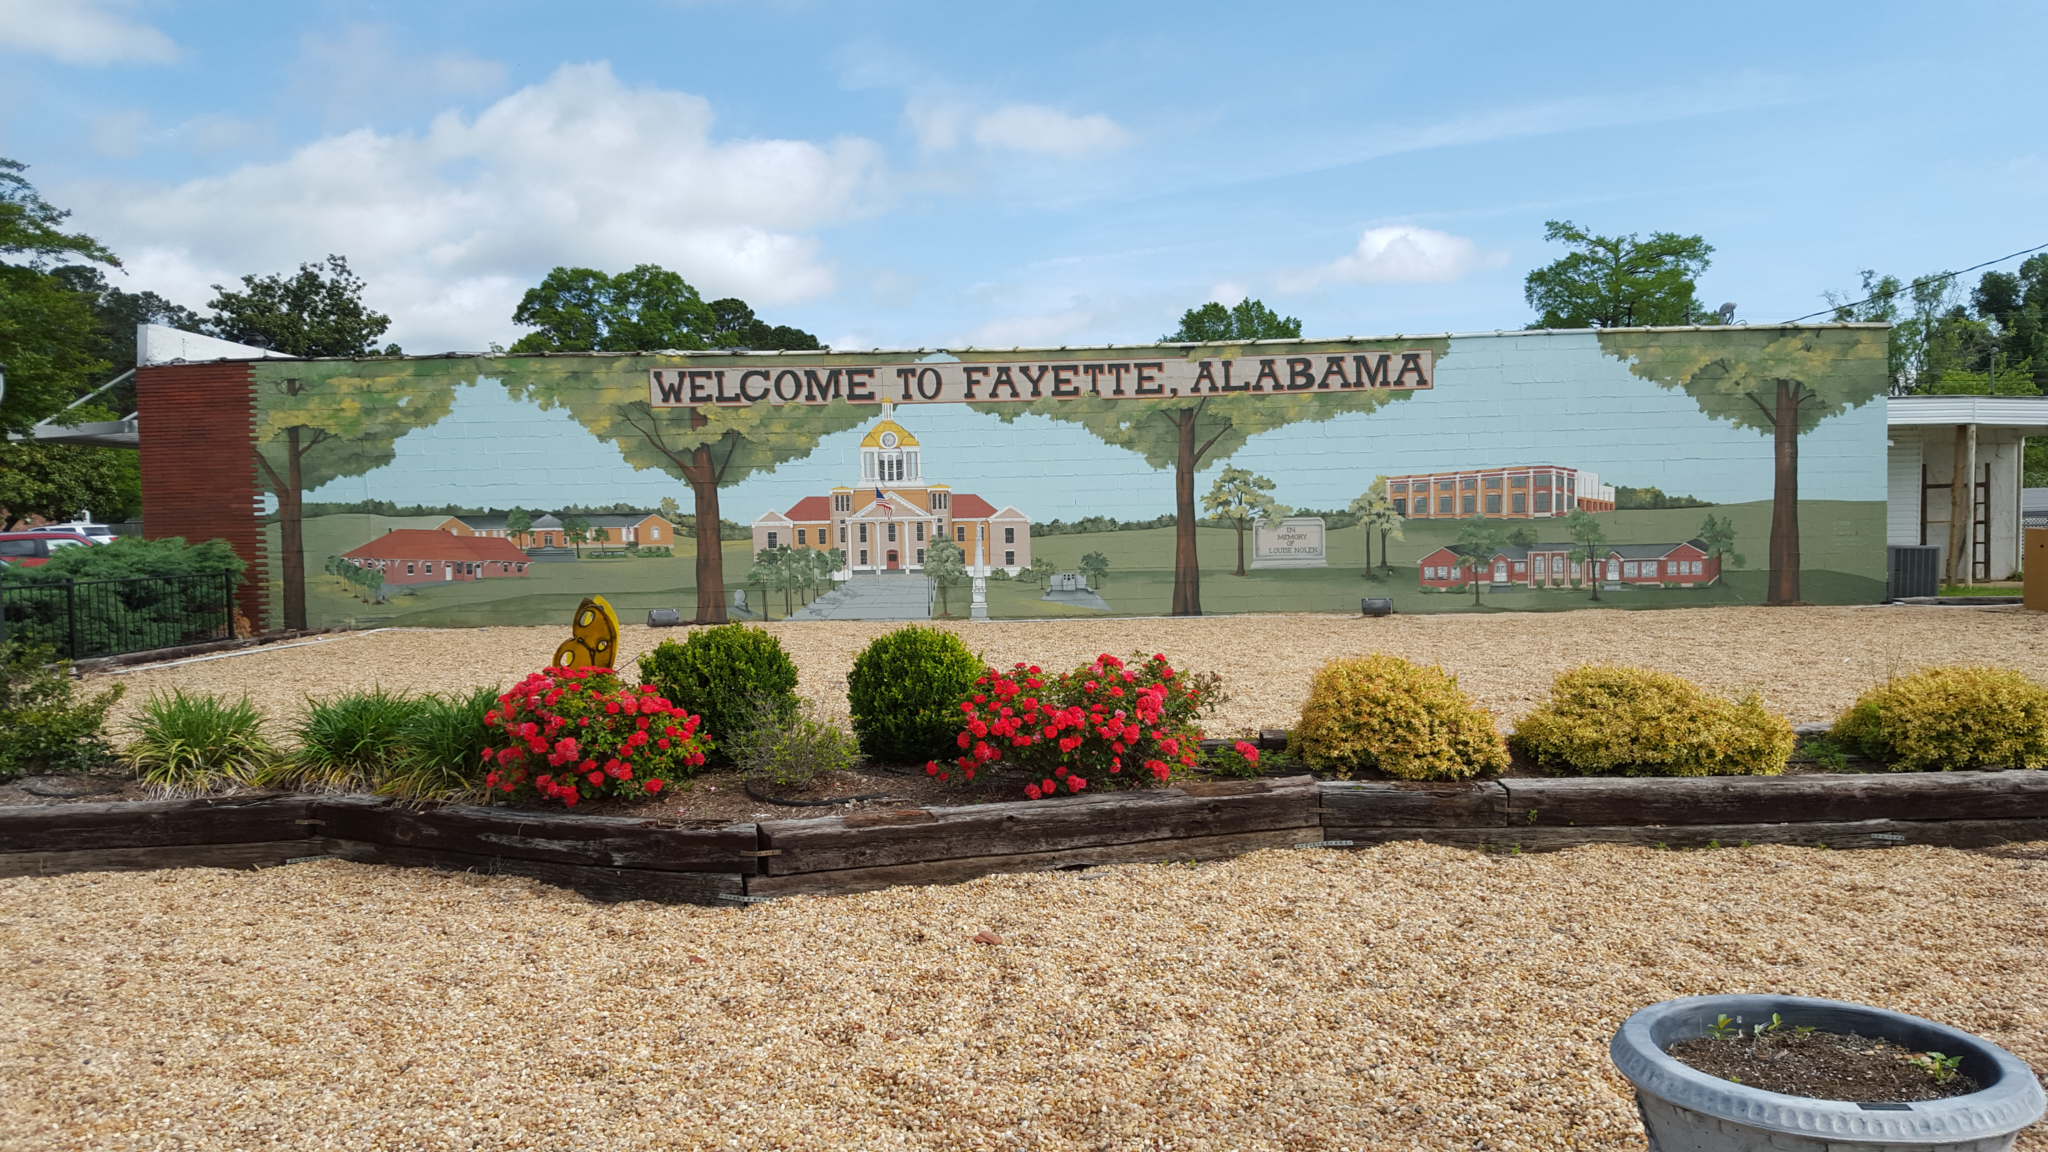 Welcome to Fayette Mural